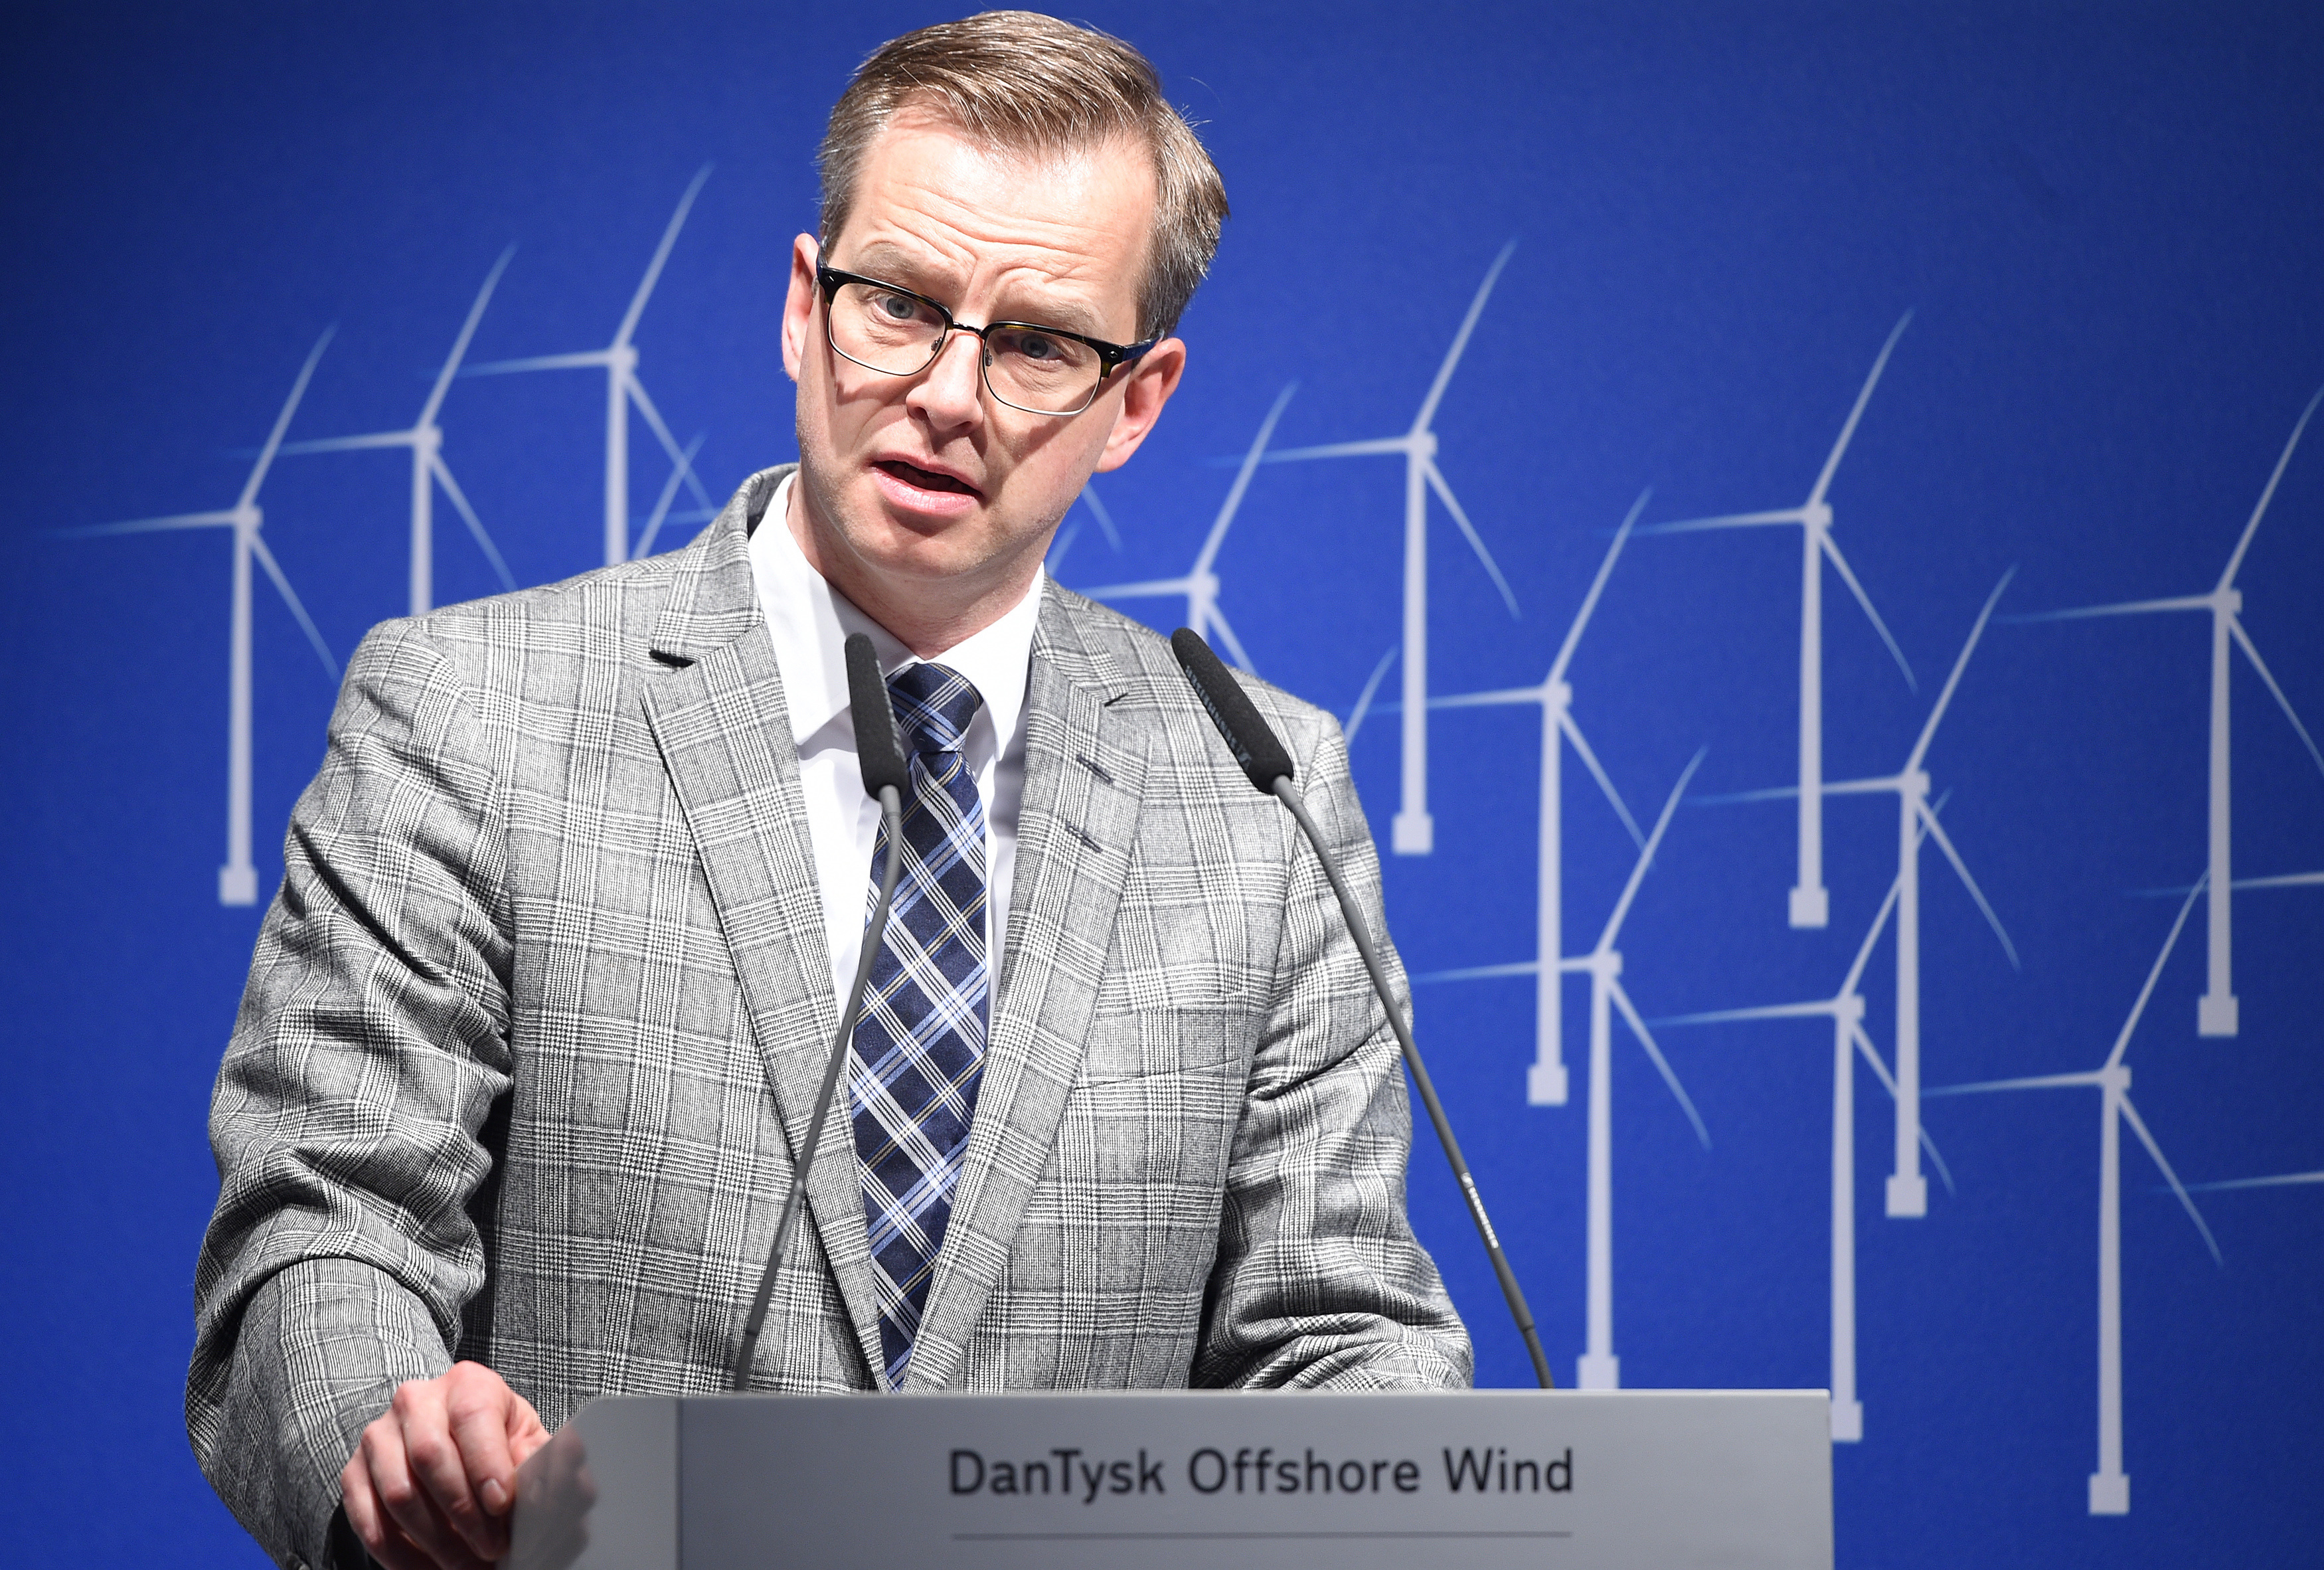 Swedish Minister for Enterprise and Innovation Damberg delivers his speech during  Dan Tysk offshore wind farm opening ceremony in Hamburg